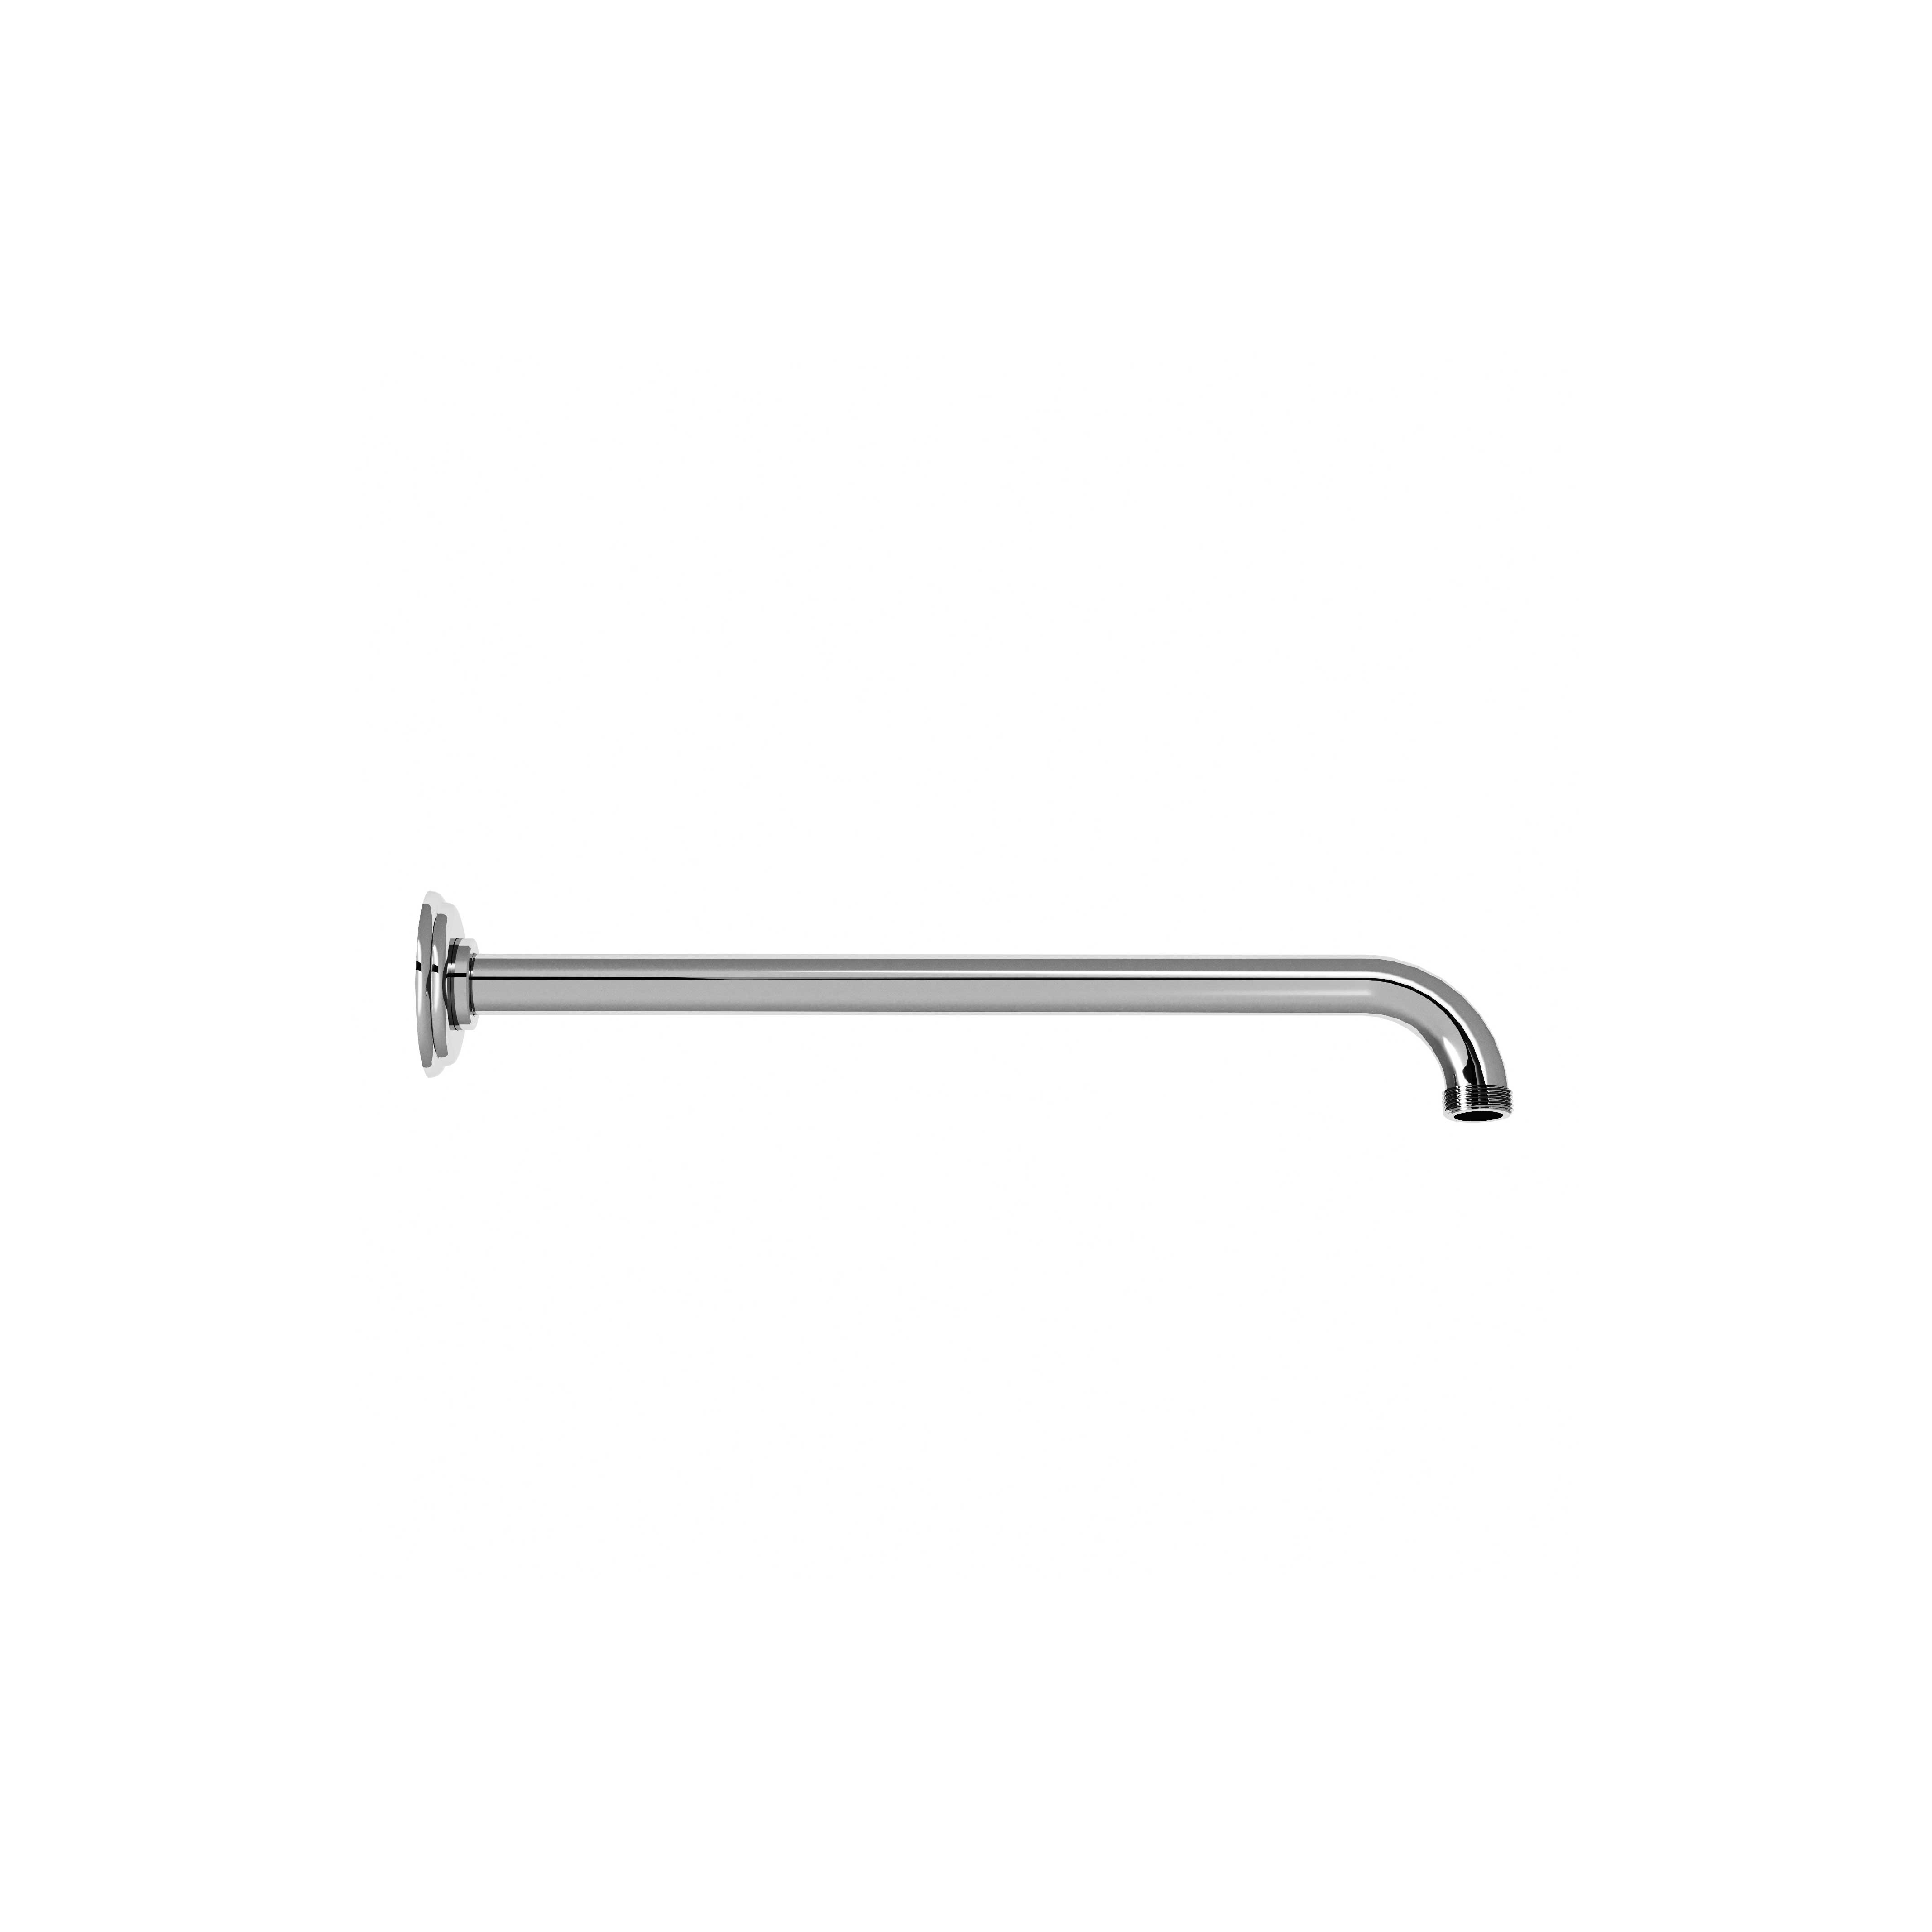 M04-2W301 Wall mounted shower arm 300mm